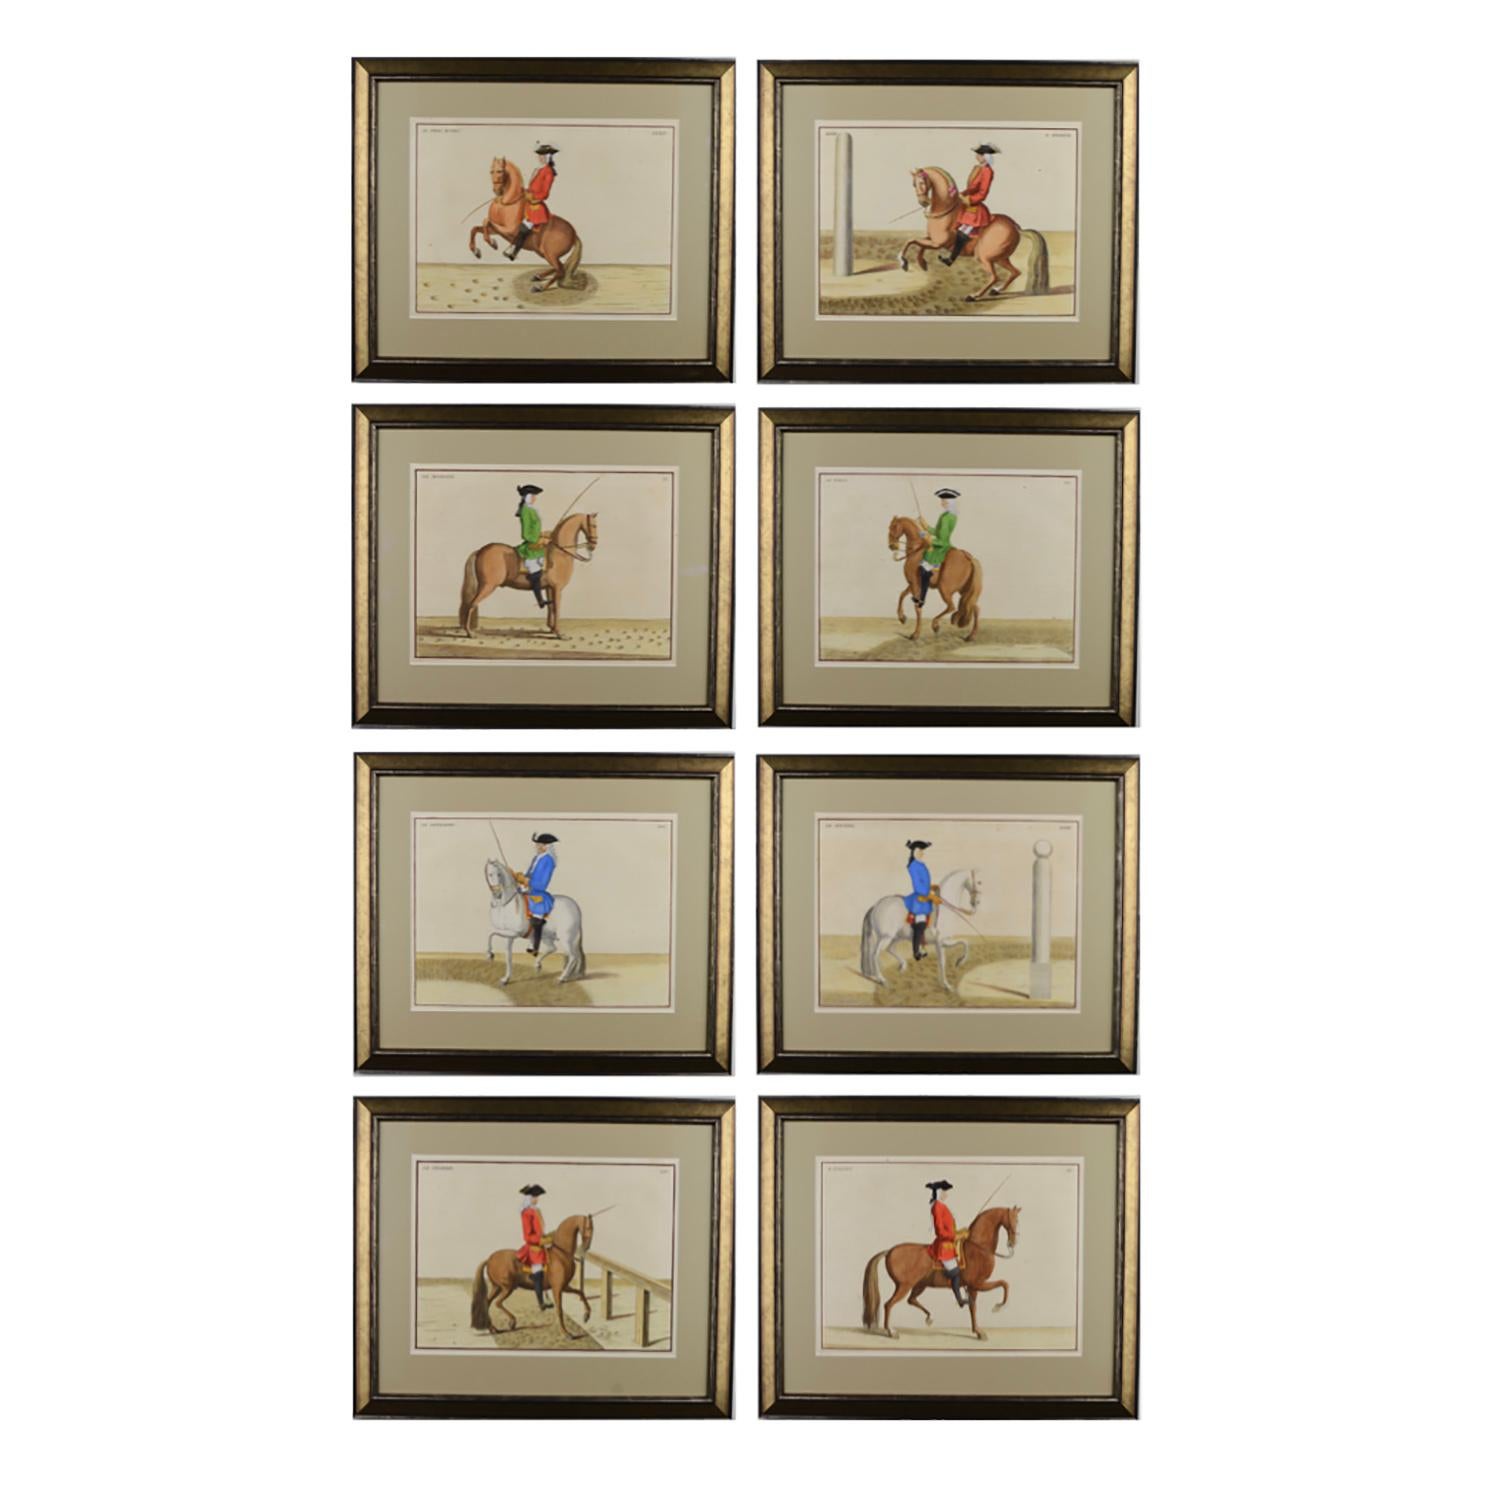 A set of 8 horses from Baron von Eisenbergs L’Art de Monter a Cheval 1747 edition. This work on horsemanship was based on the Spanish riding school and was dedicated to King George ll.